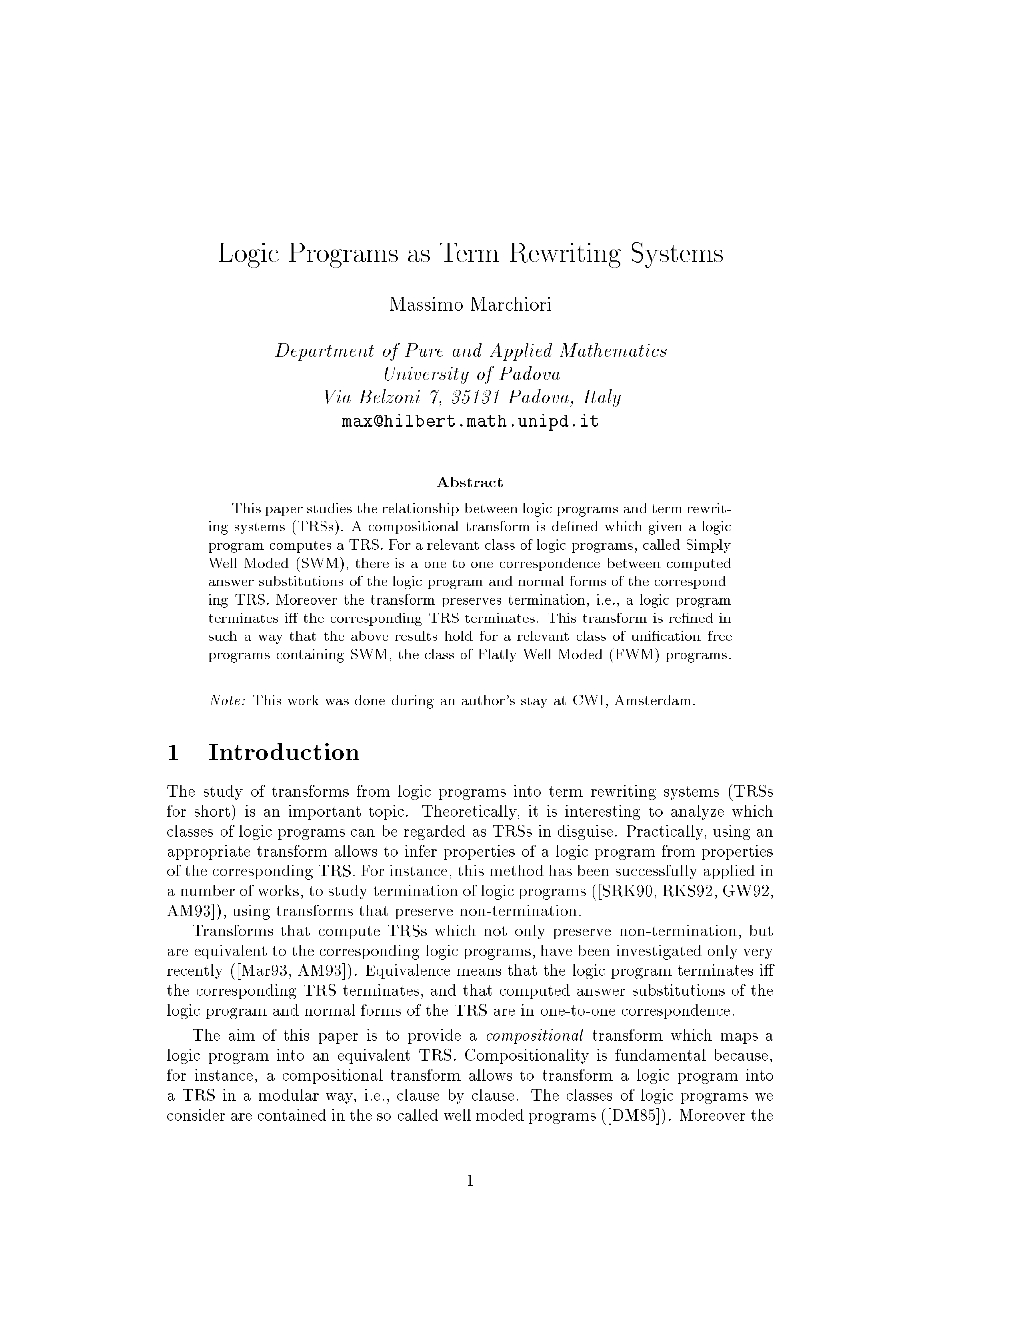 Logic Programs As Term Rewriting Systems 1 Introduction